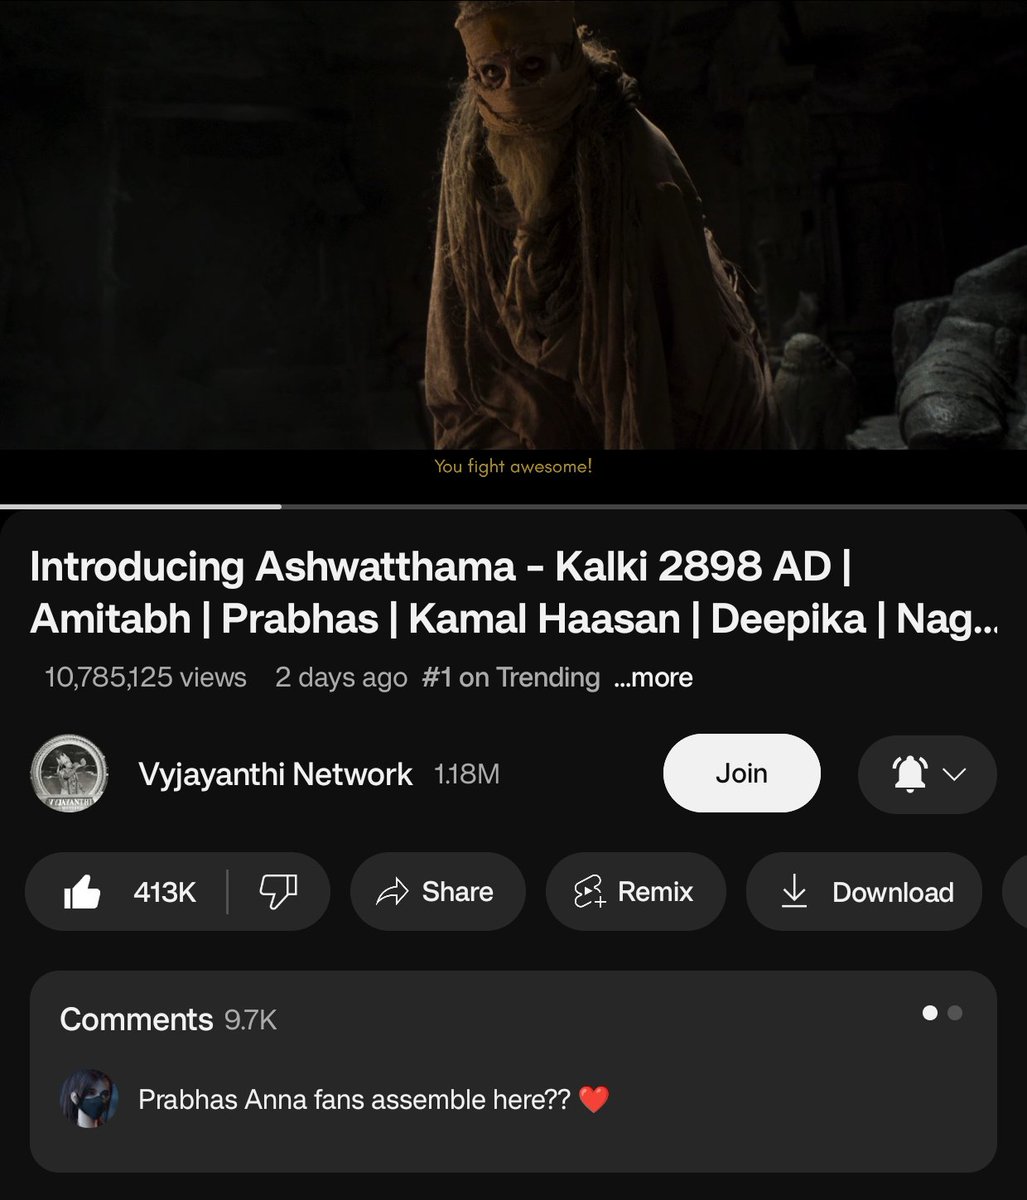 @SrBachchan Your introduction as ASHWATHAMA is still the Trending #1 on YouTube🔥🔥🔥 Expecting some powerful scenes from you, just like Kattappa's in #Baahubali, to ELEVATE #Prabhas' character in #Kalki2898AD 🥵🥵